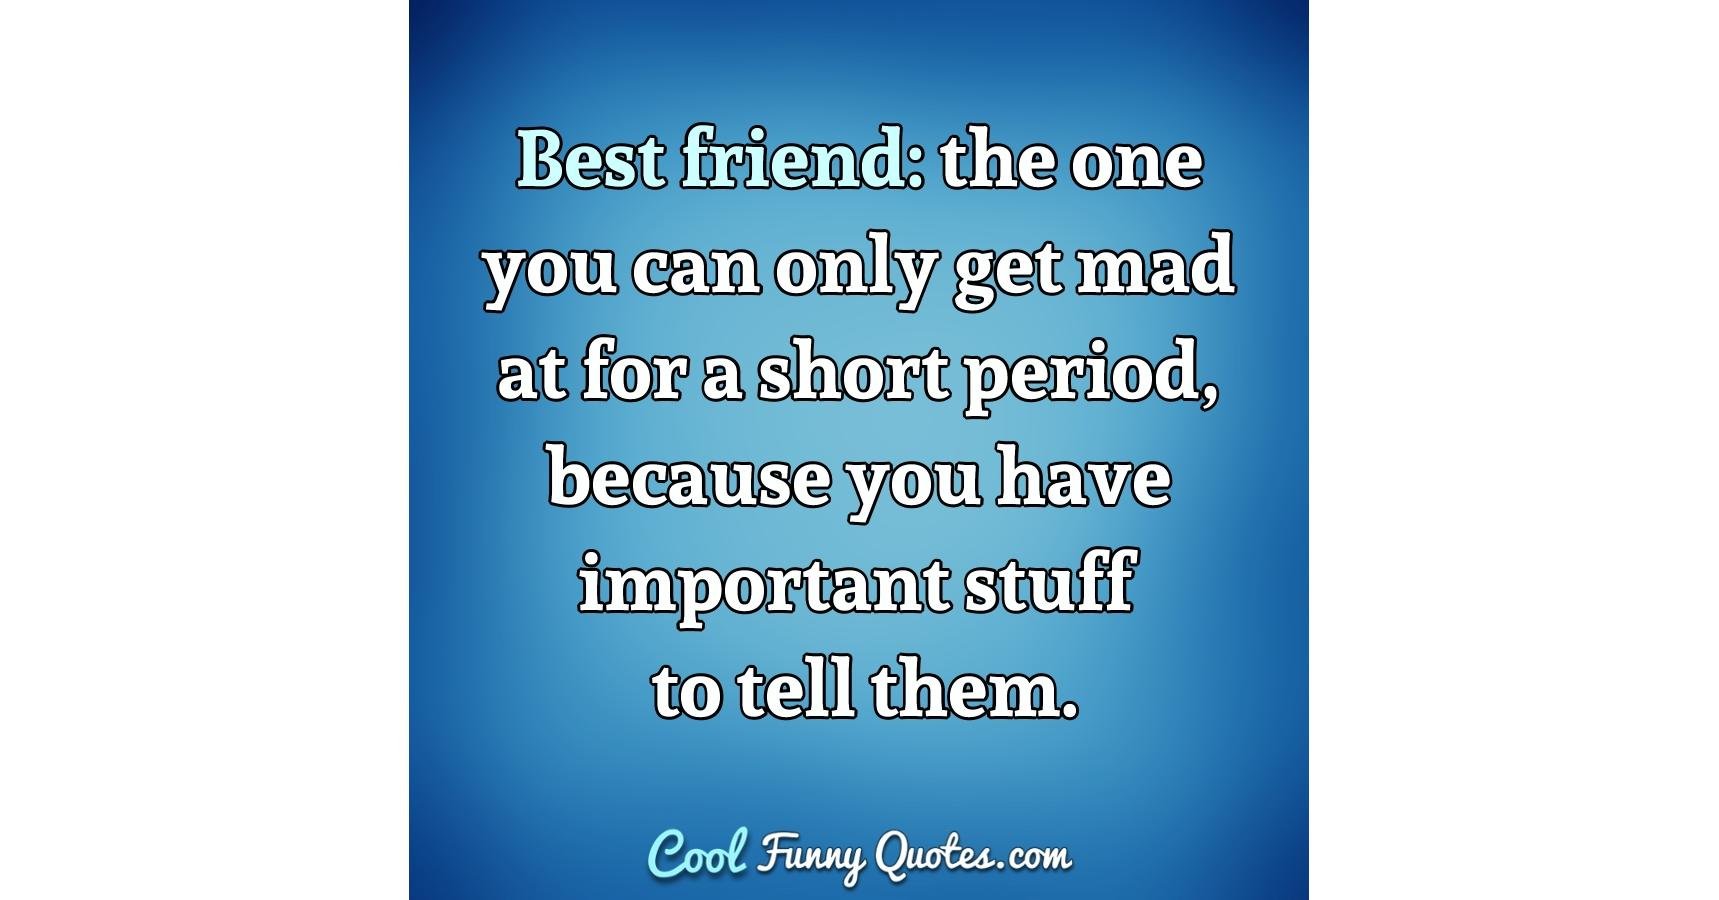 Best friend: the one you can only get mad at for a short period